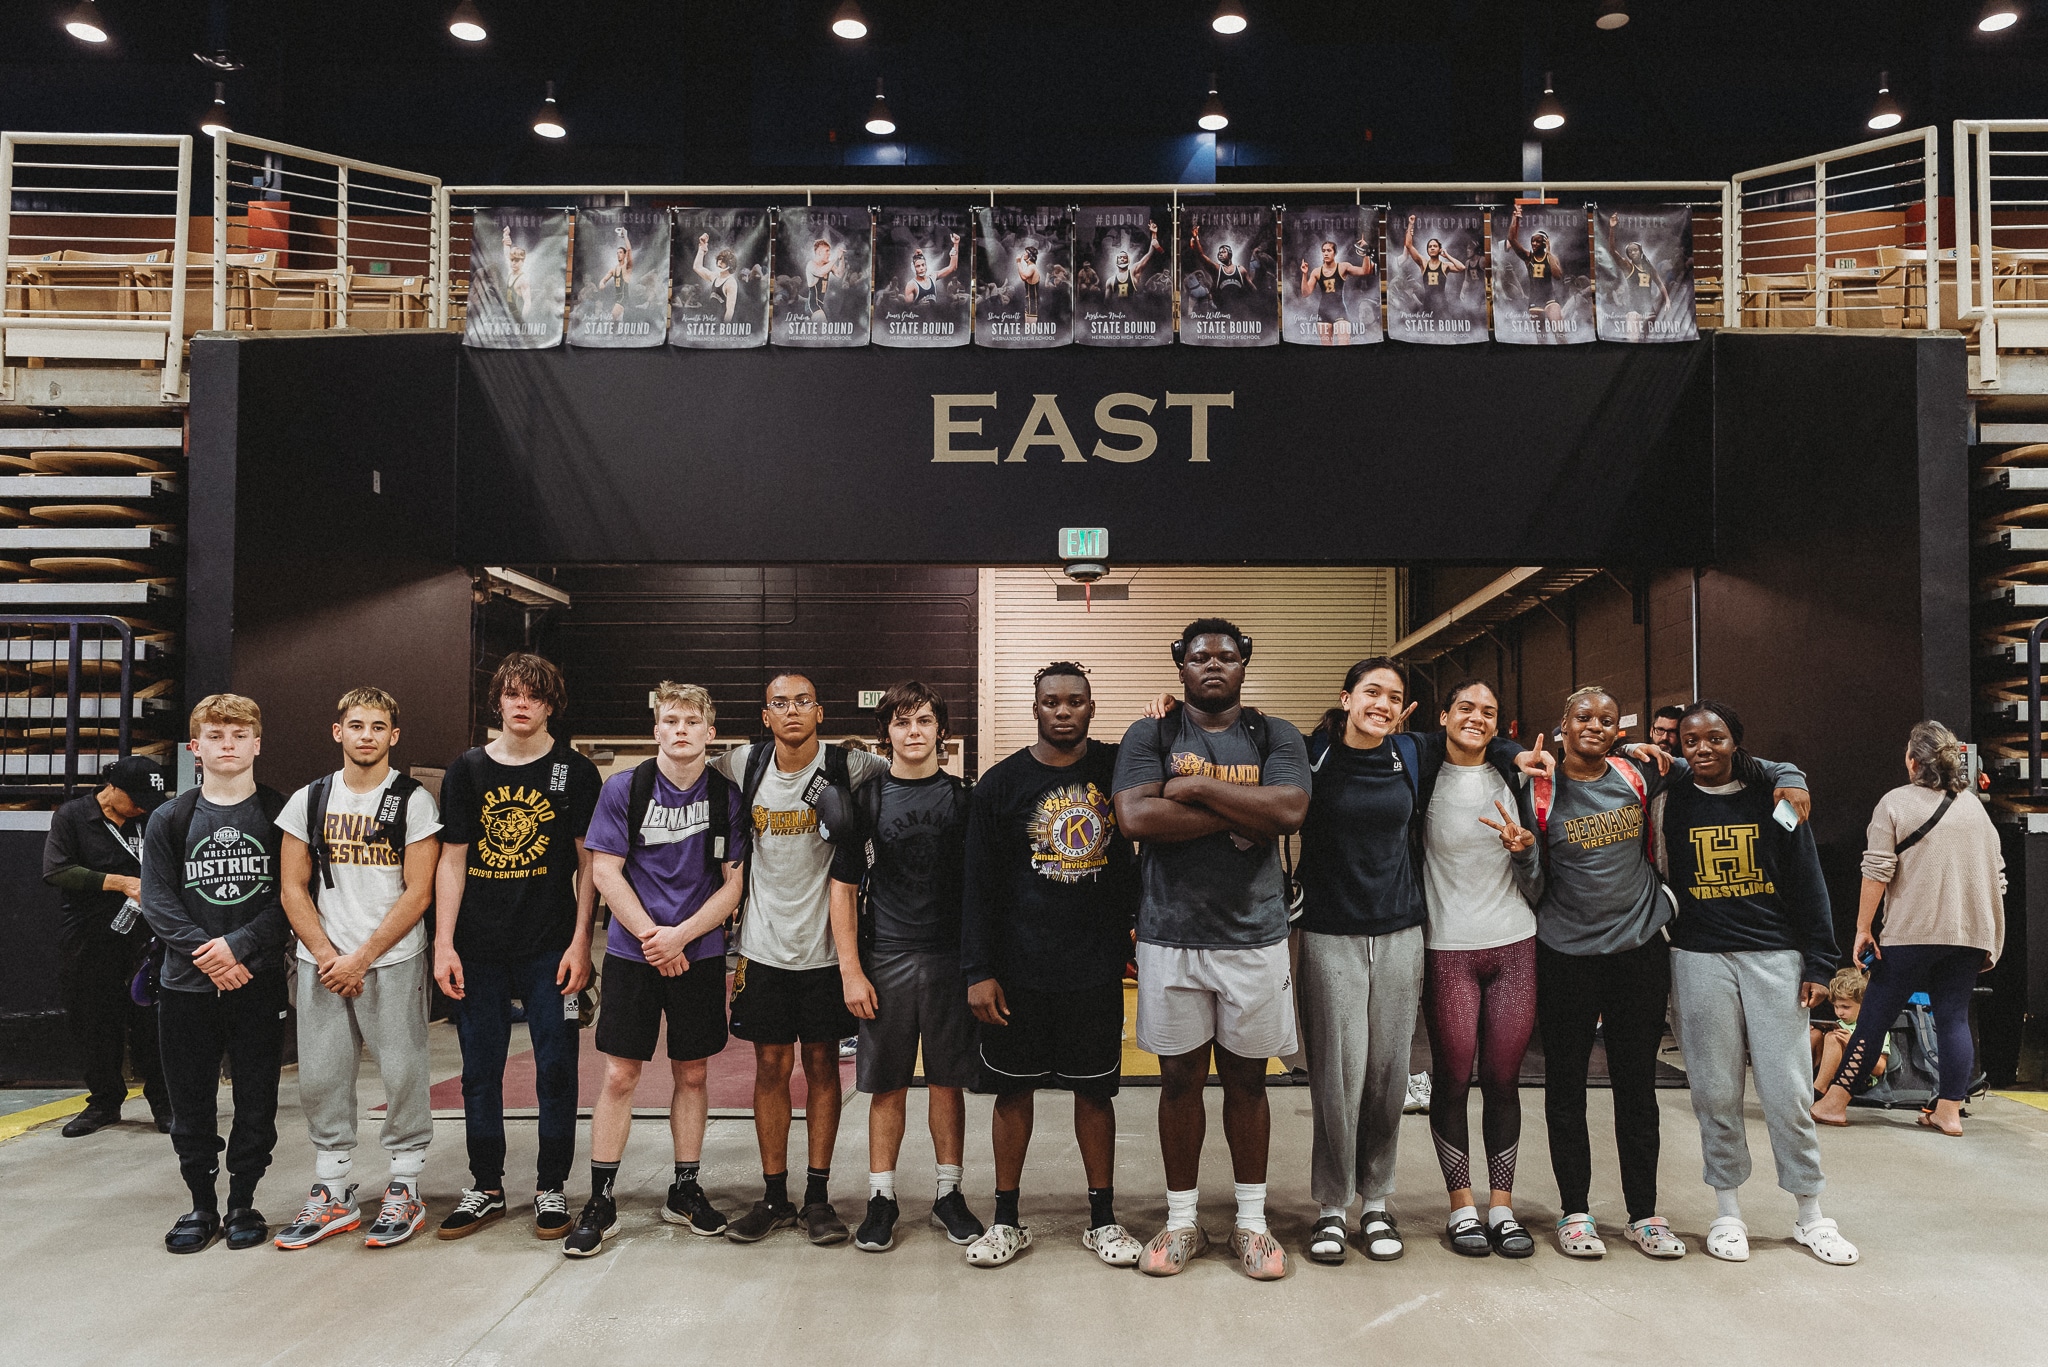 Hernando High School State Wrestling Qualifiers pose beneath their banners at Silver Spurs Arena. Left to Right: Kyle Pearson, Jordyn Valle, Kenneth Pritz, TJ Rodier, James Gadson, Shaw Garrett, Jayshawn Nantce, Devin Williams, Grace Leota, Mariah Earl, Olivia Brown, and Makenzie Eltzroth.